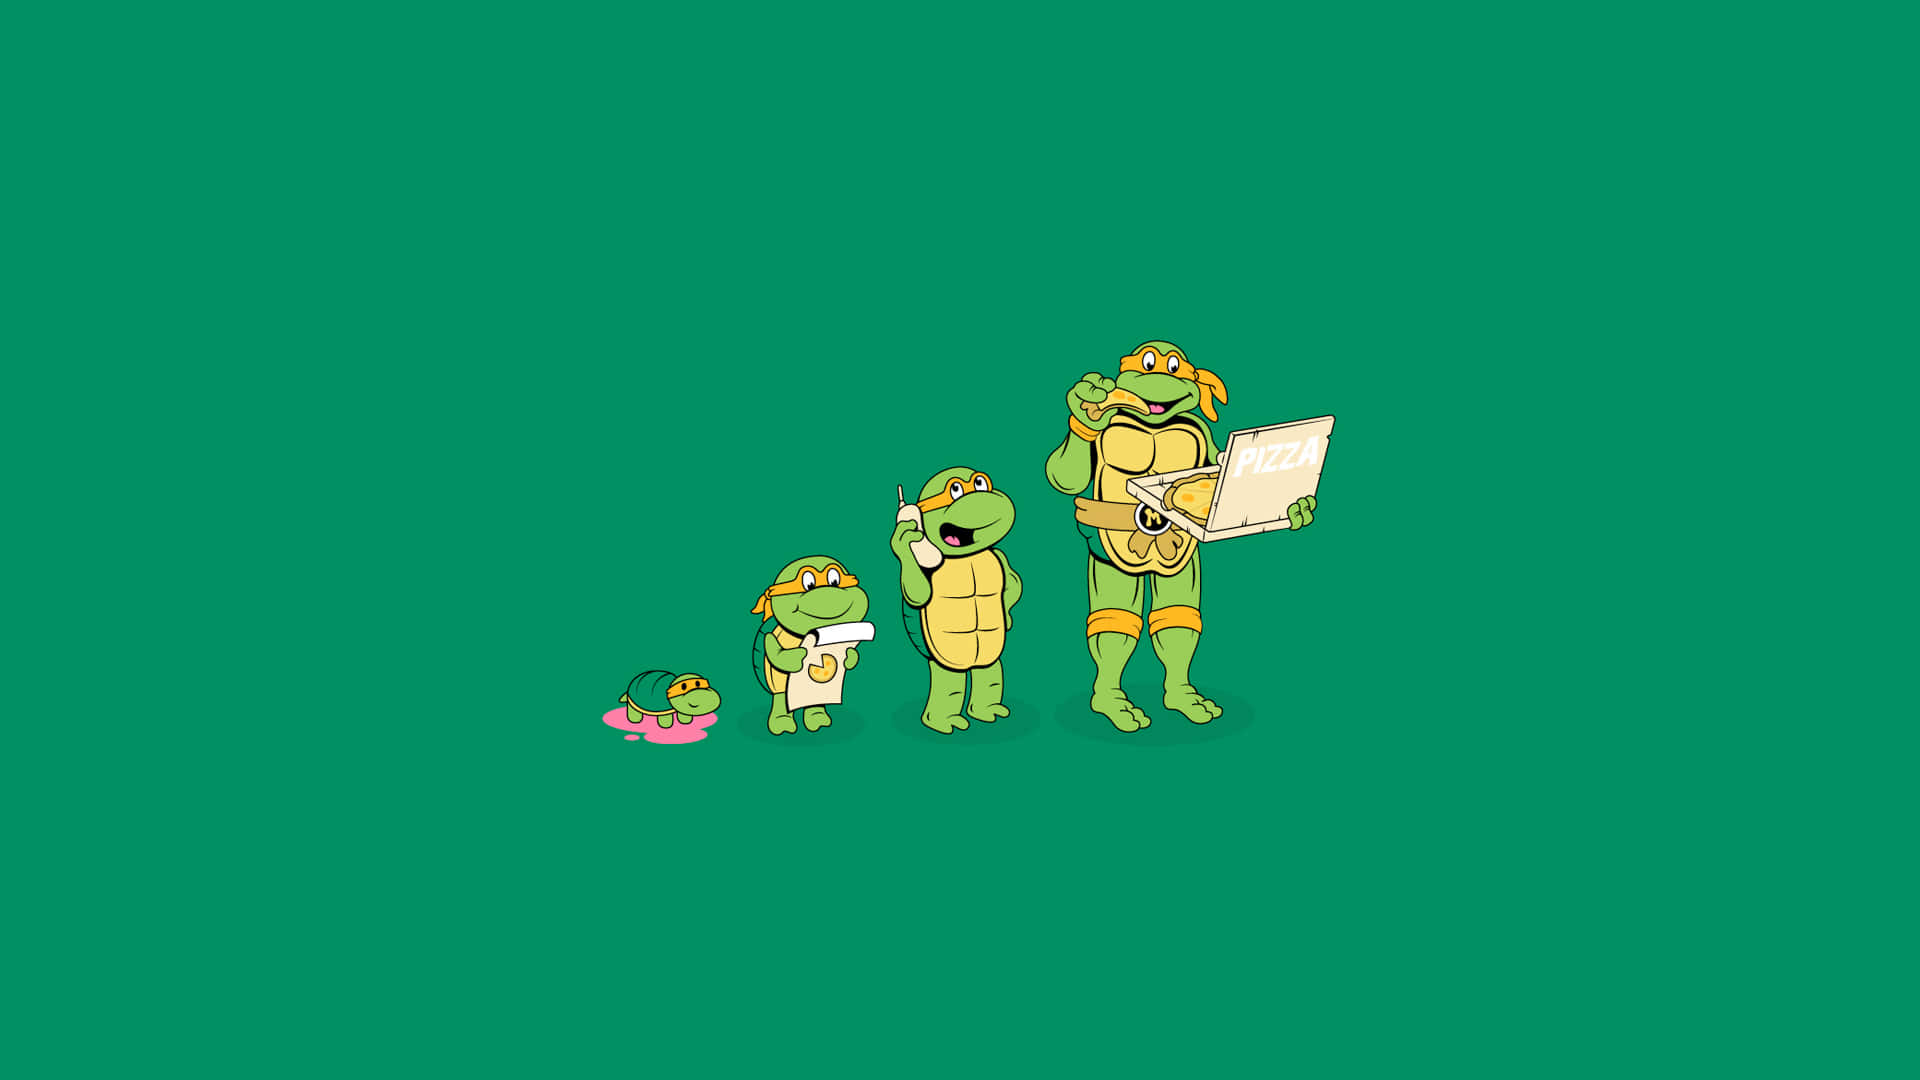 Michelangelo Growth Phases Wallpaper